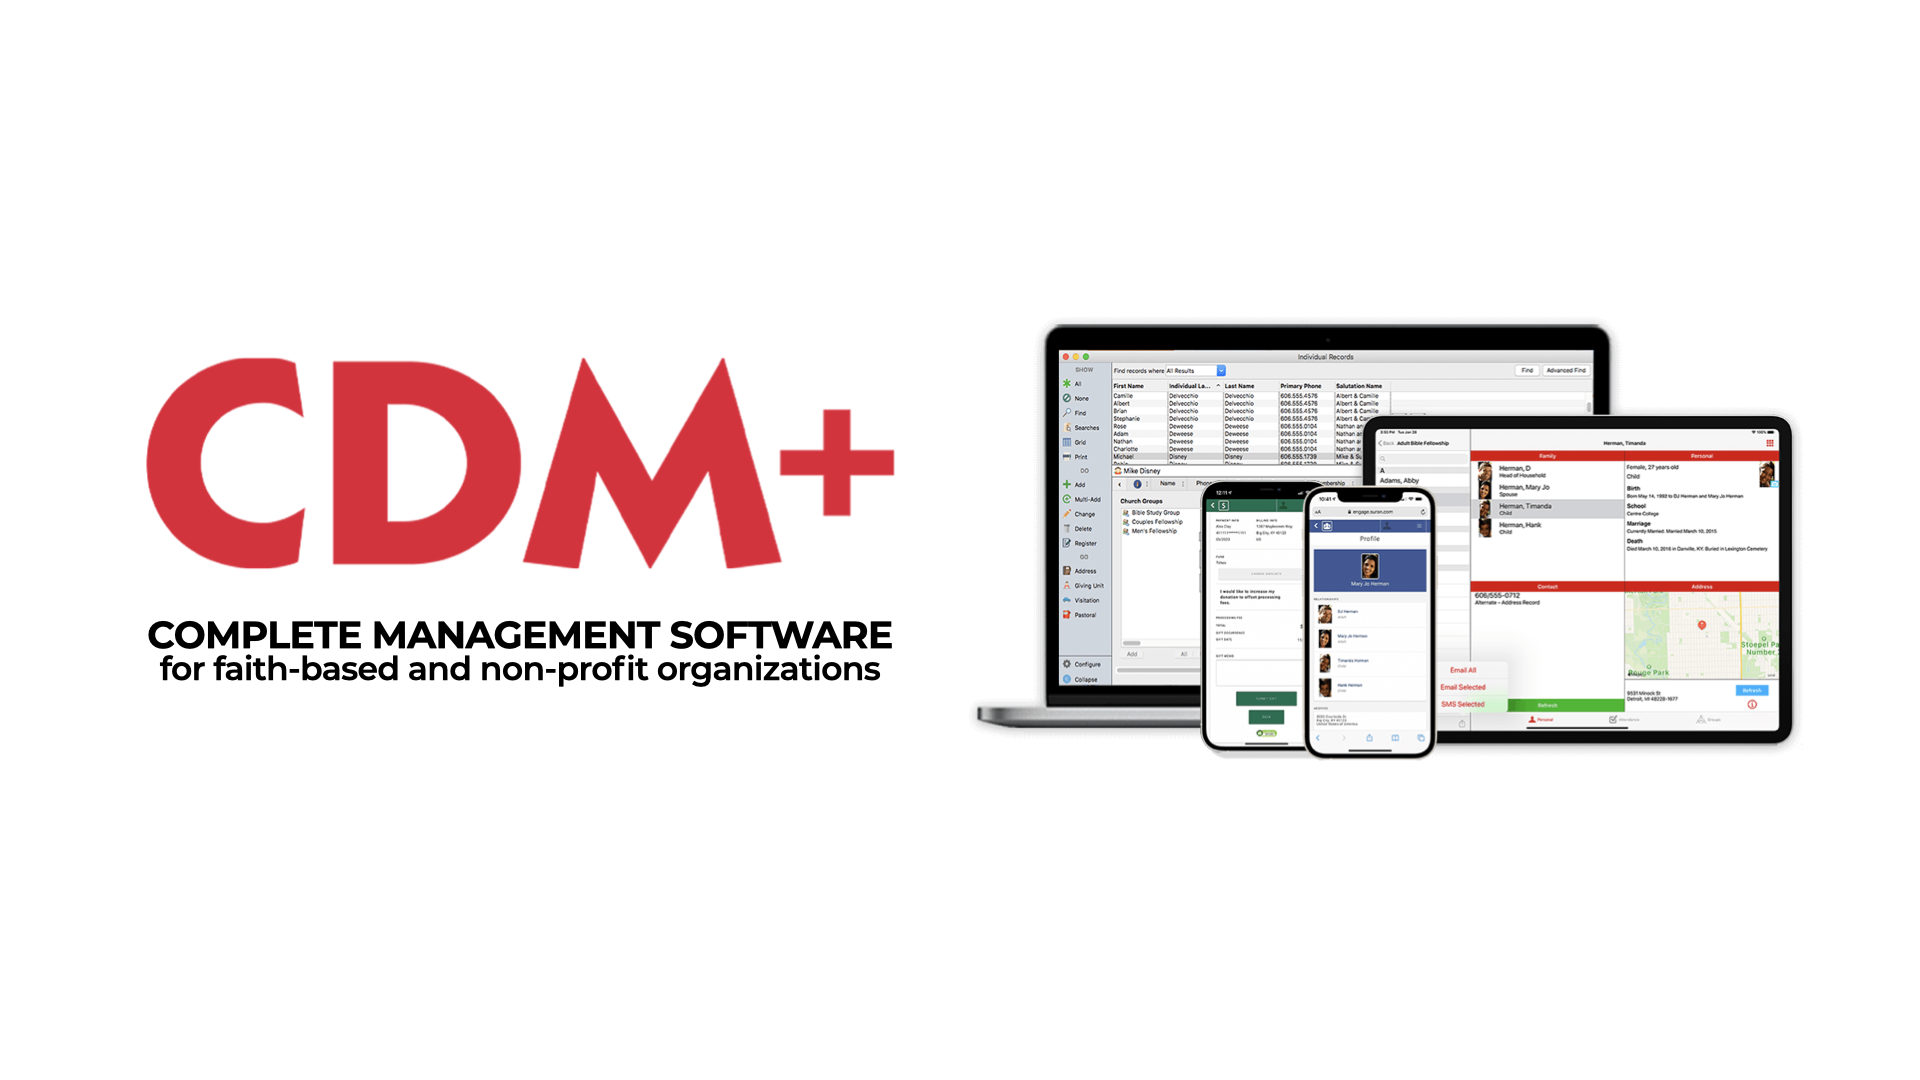 Manage finances, staff, events, facilities, members, and giving all in one flexible platform.